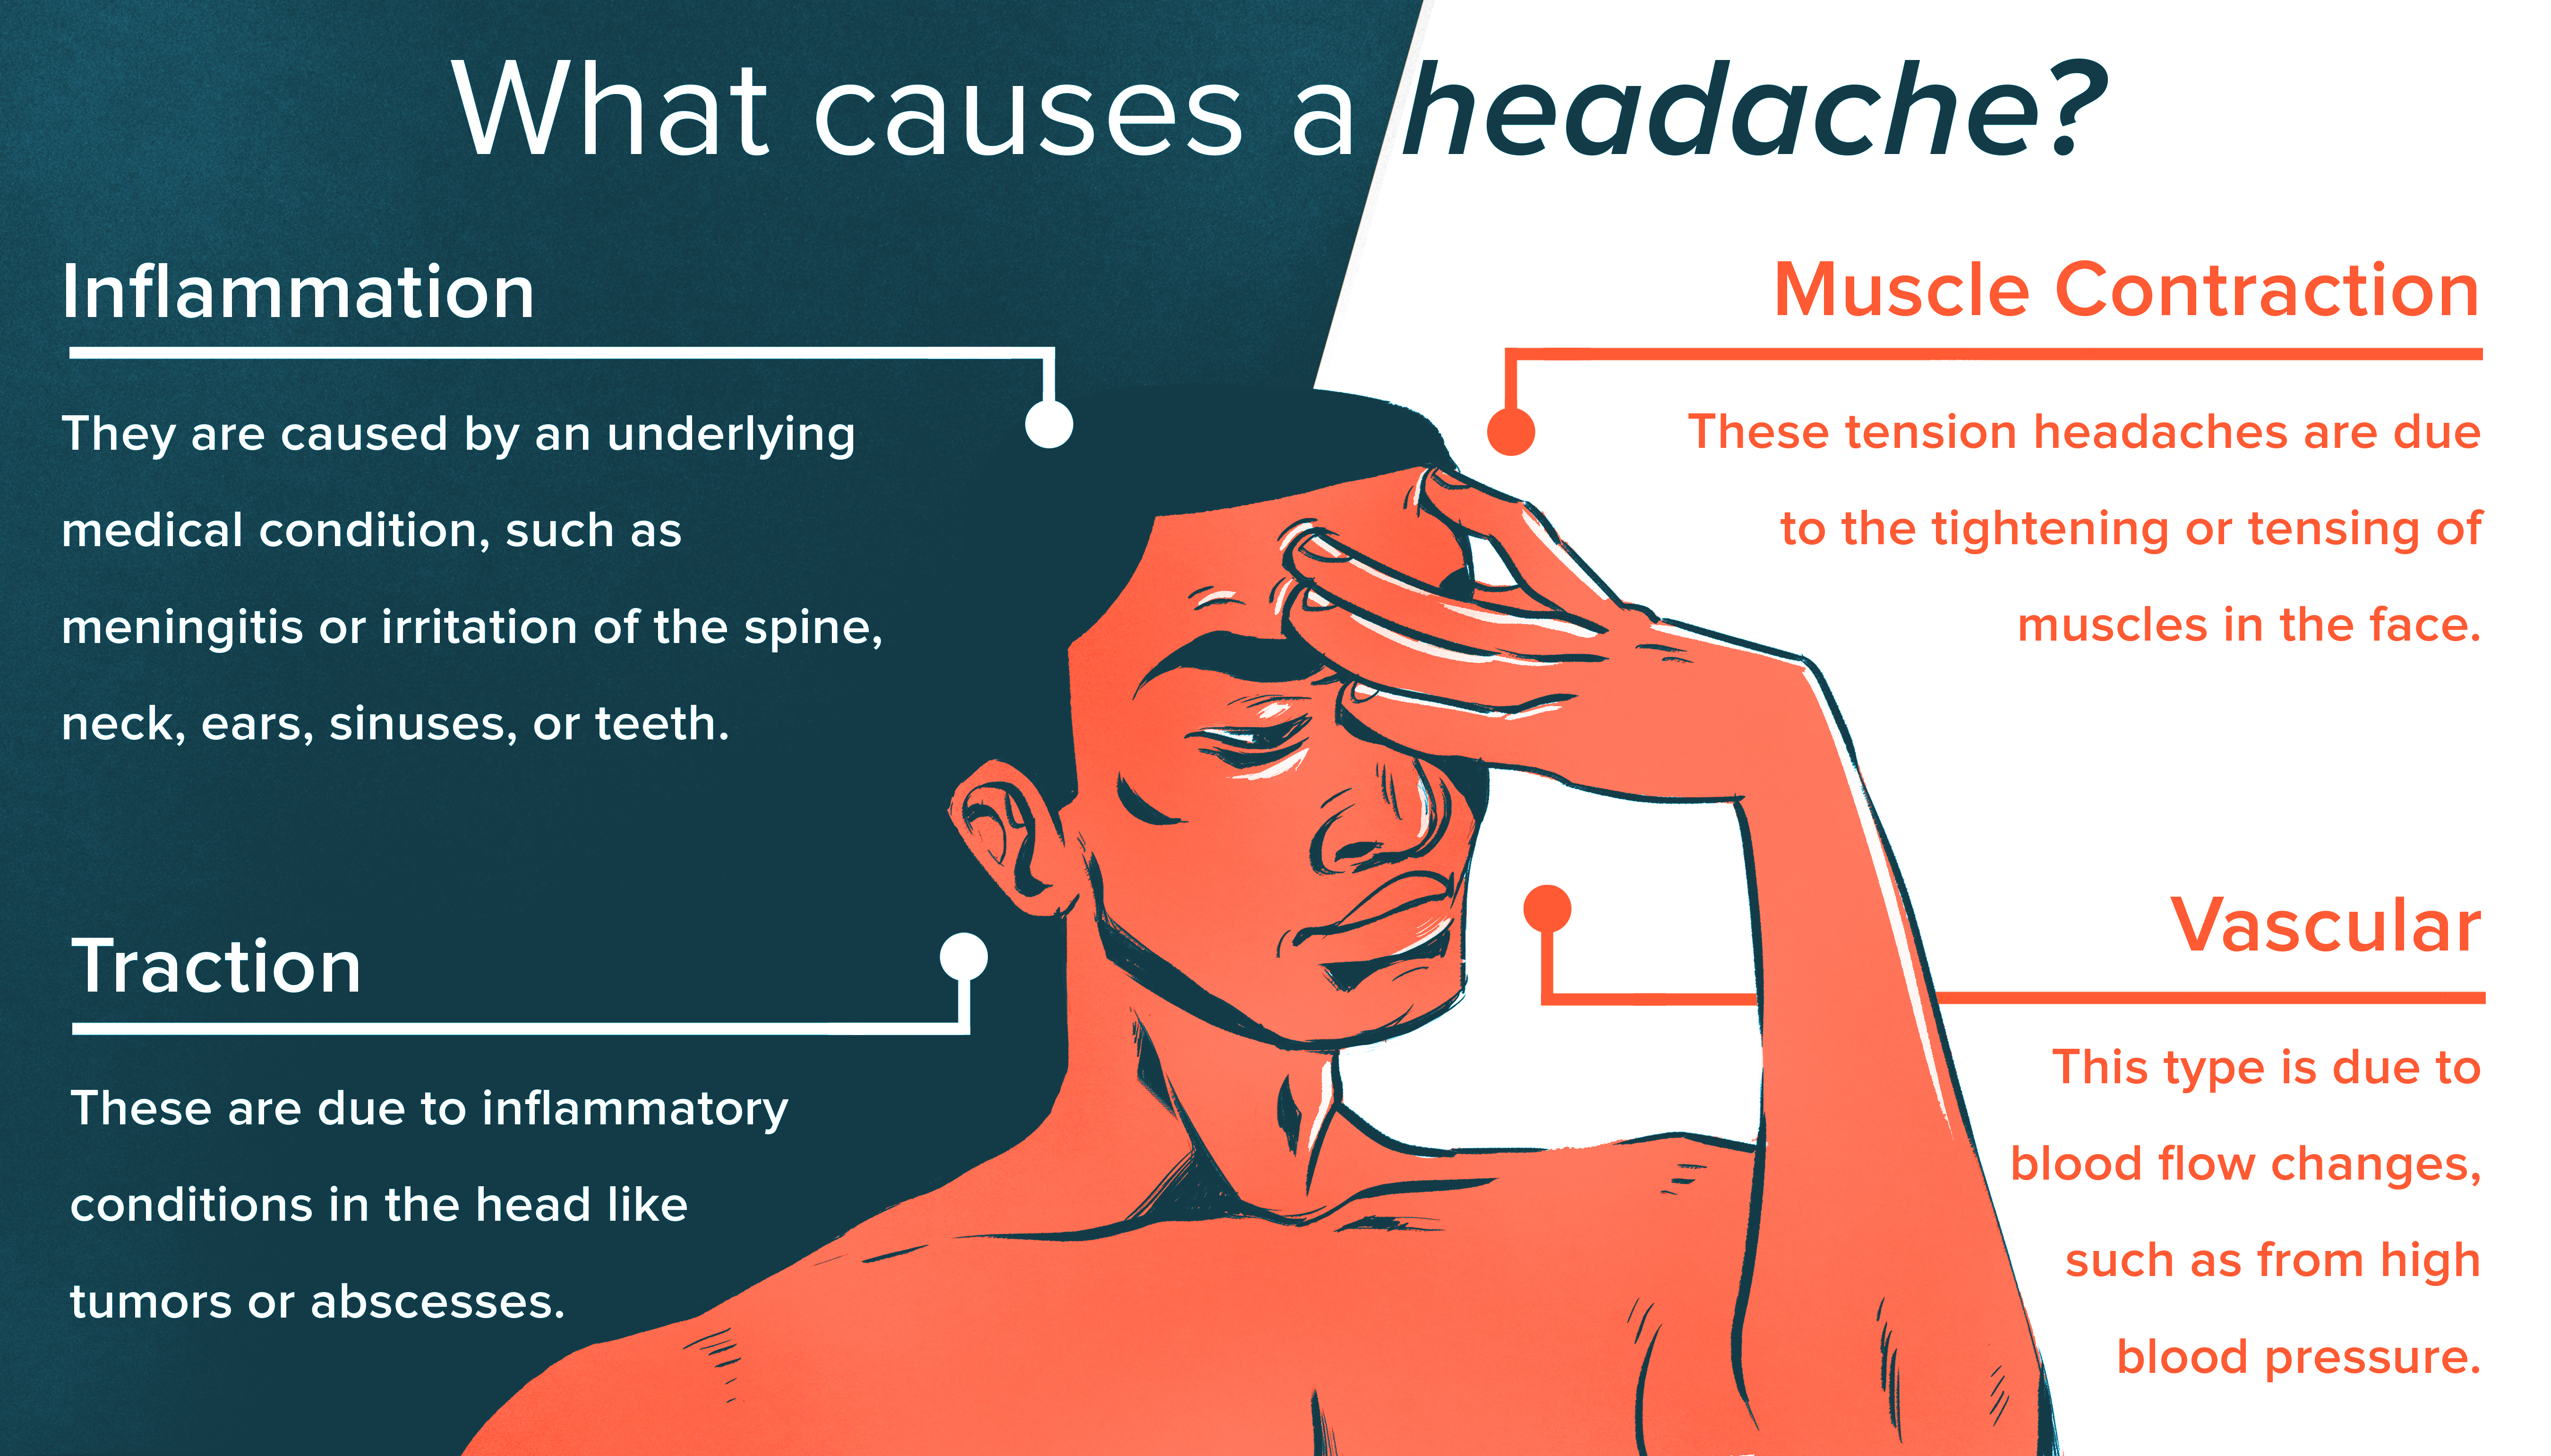 How can I get relief from tension headaches?